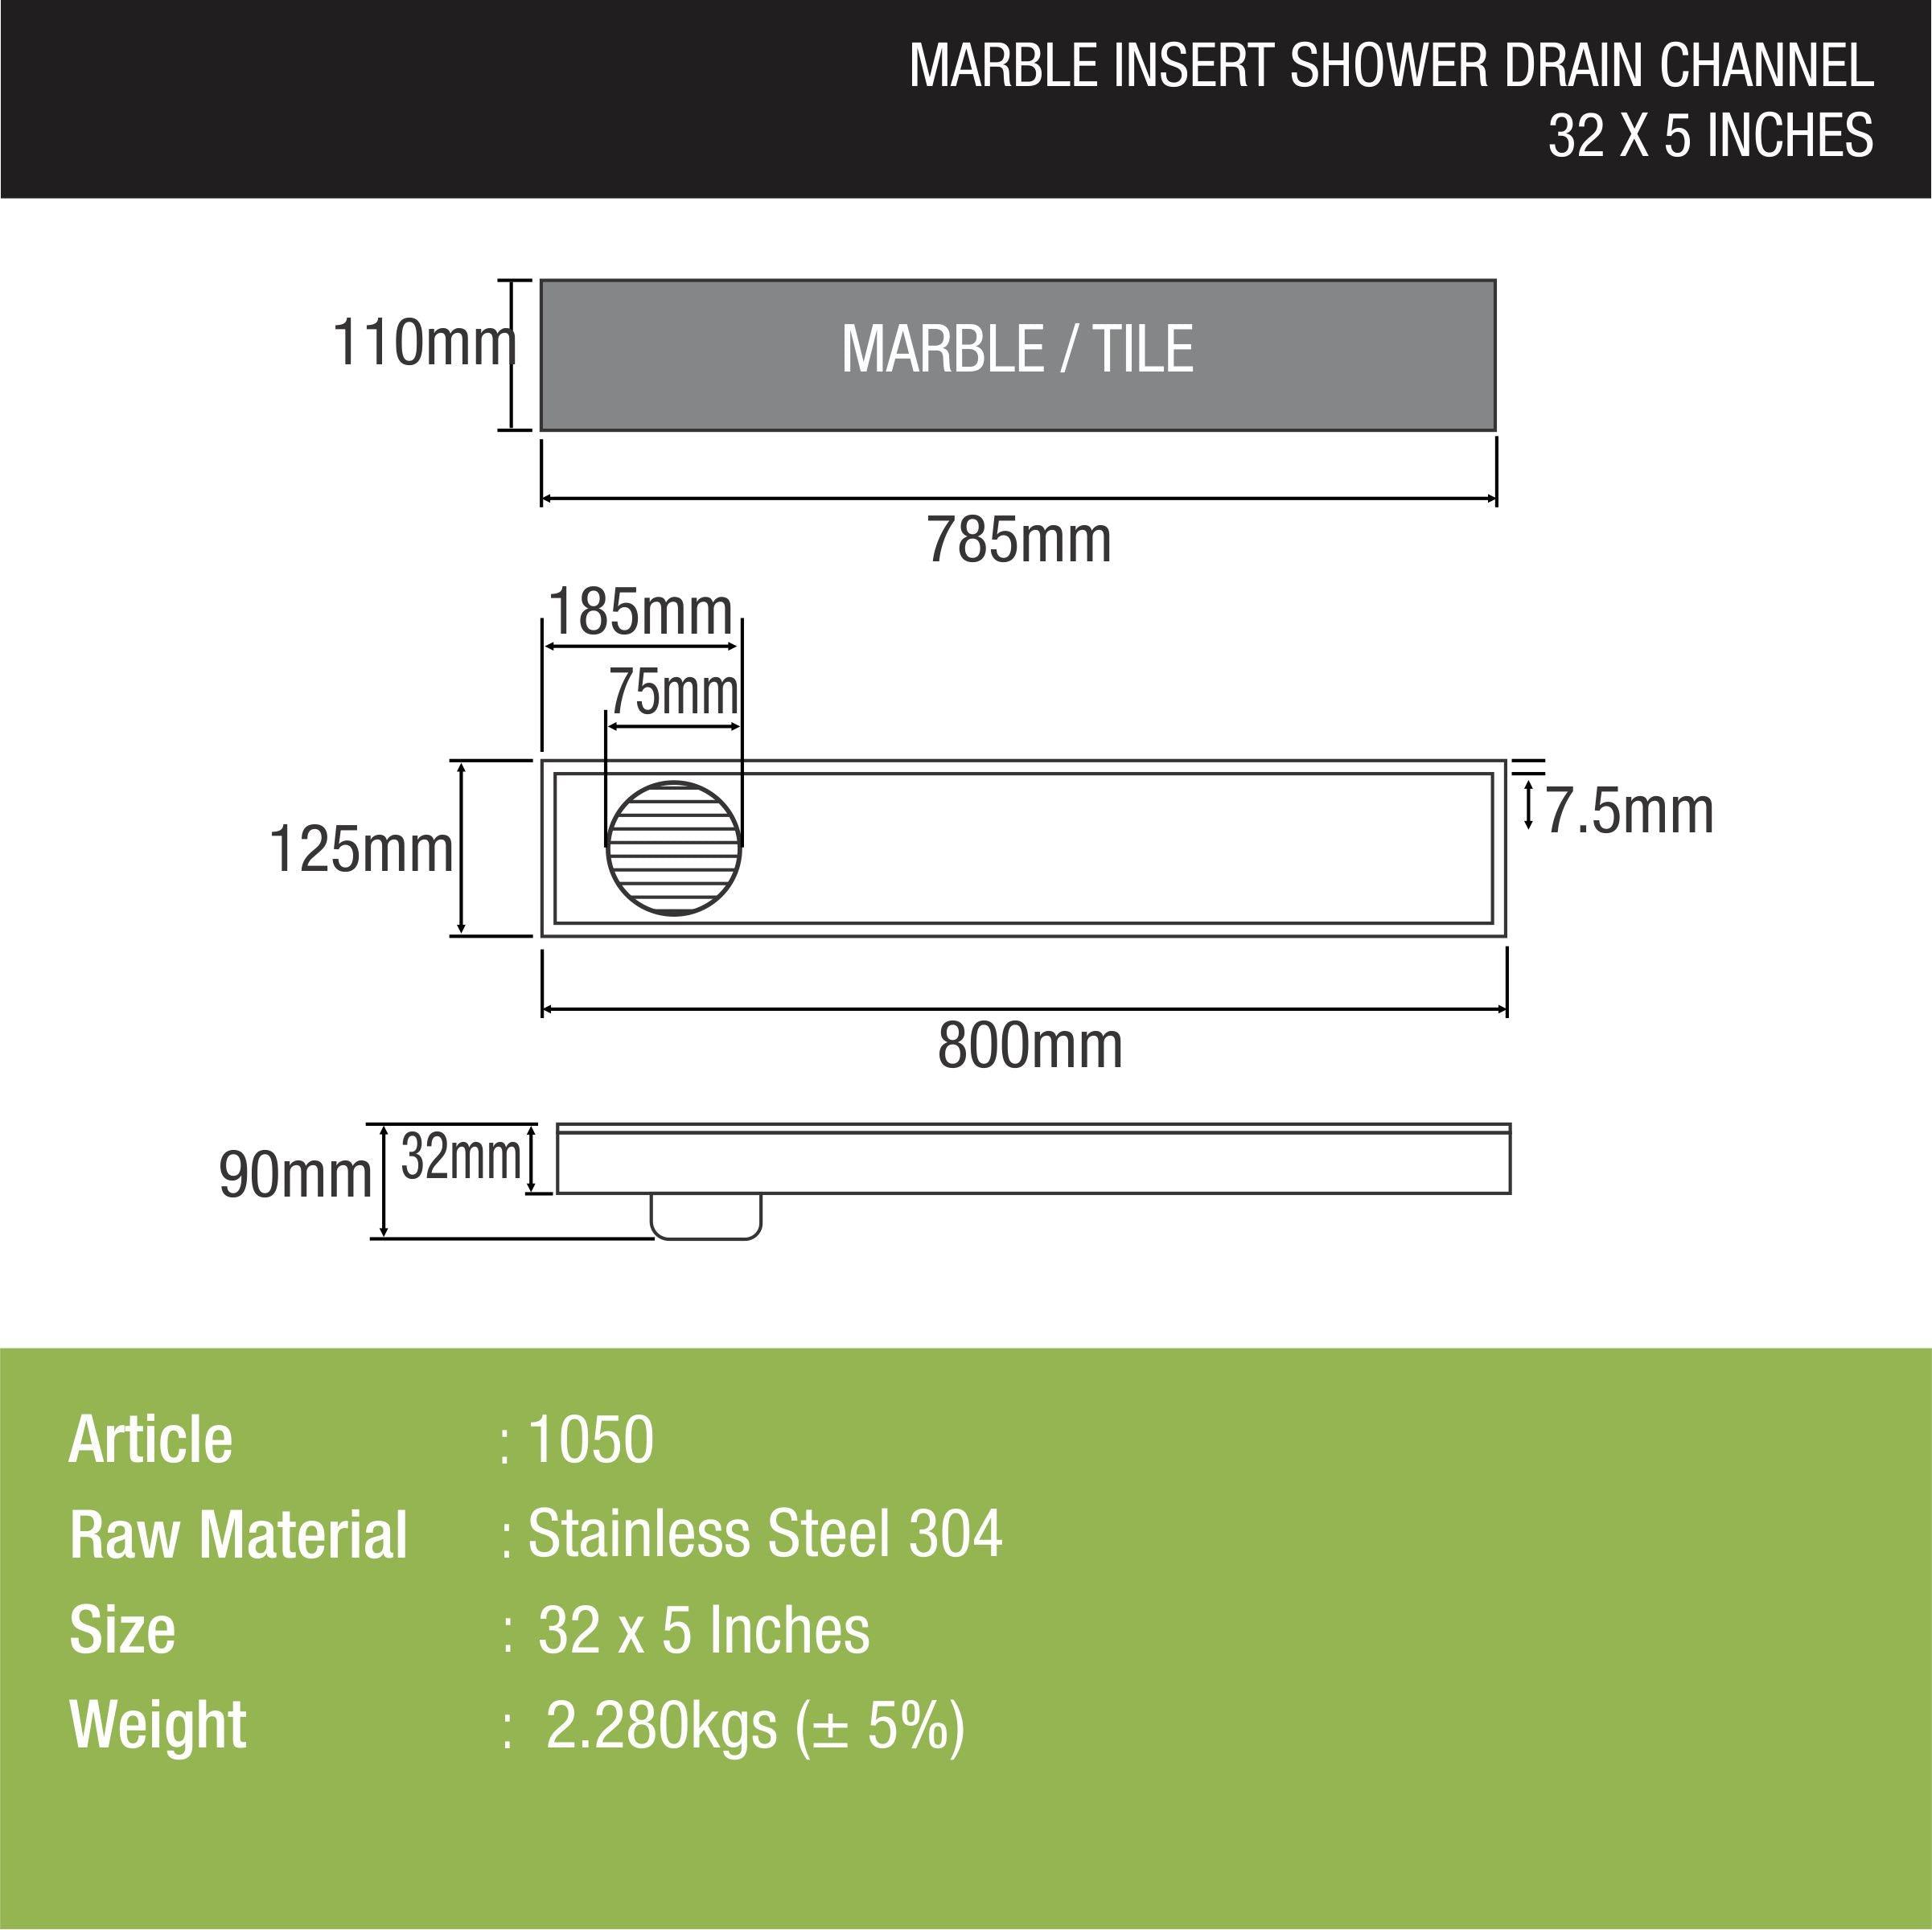 Marble Insert Shower Drain Channel (32 x 5 Inches) sizes and dimensions